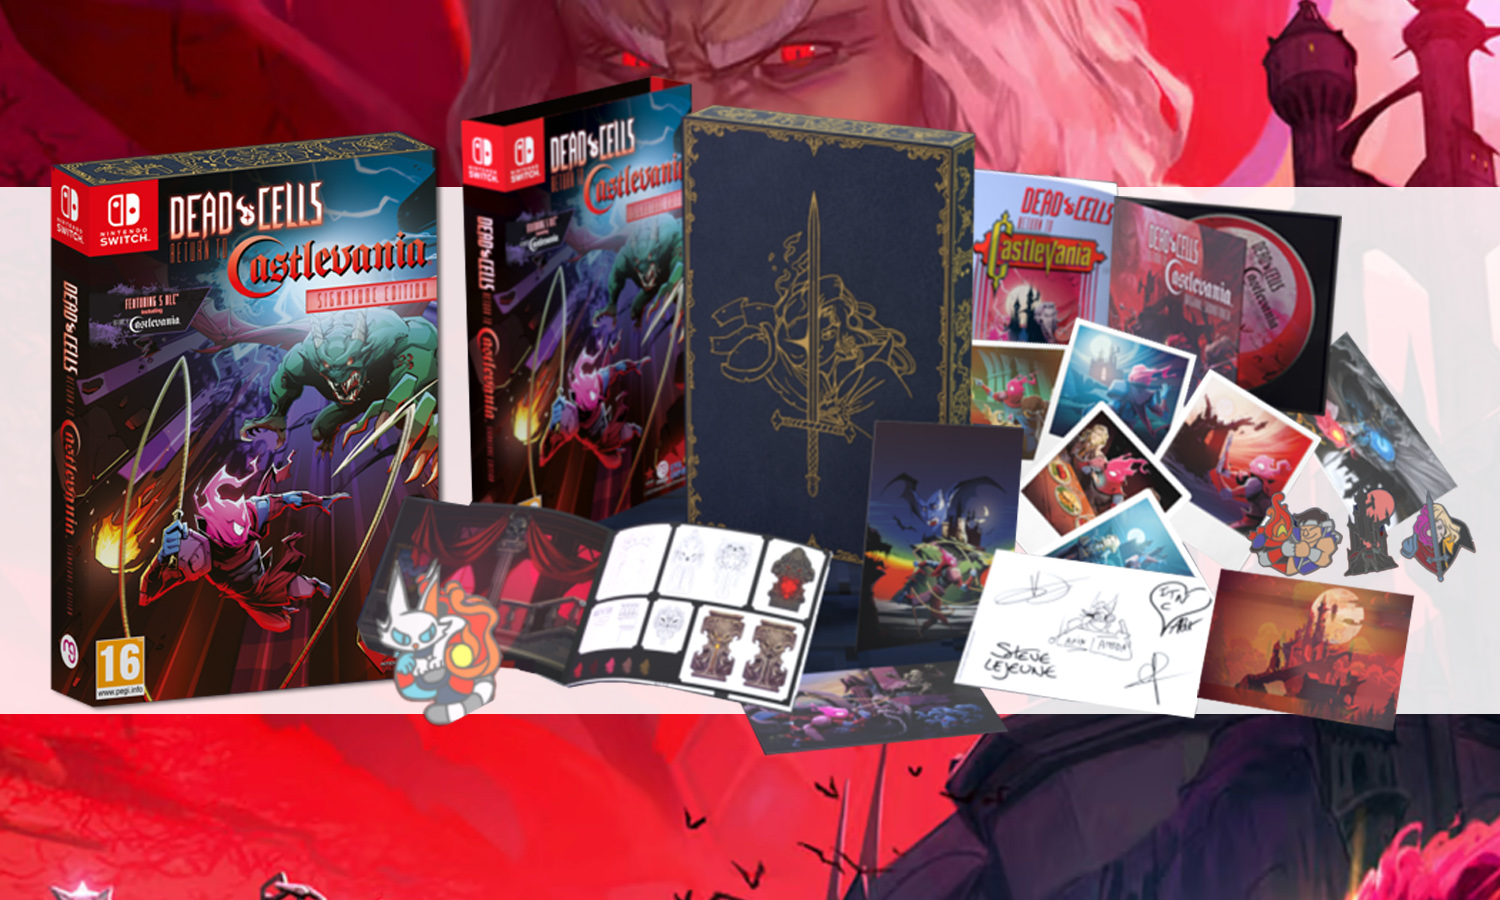 Dead Cells: Return To Castlevania  Switch Signature Edition - Available  Now! 